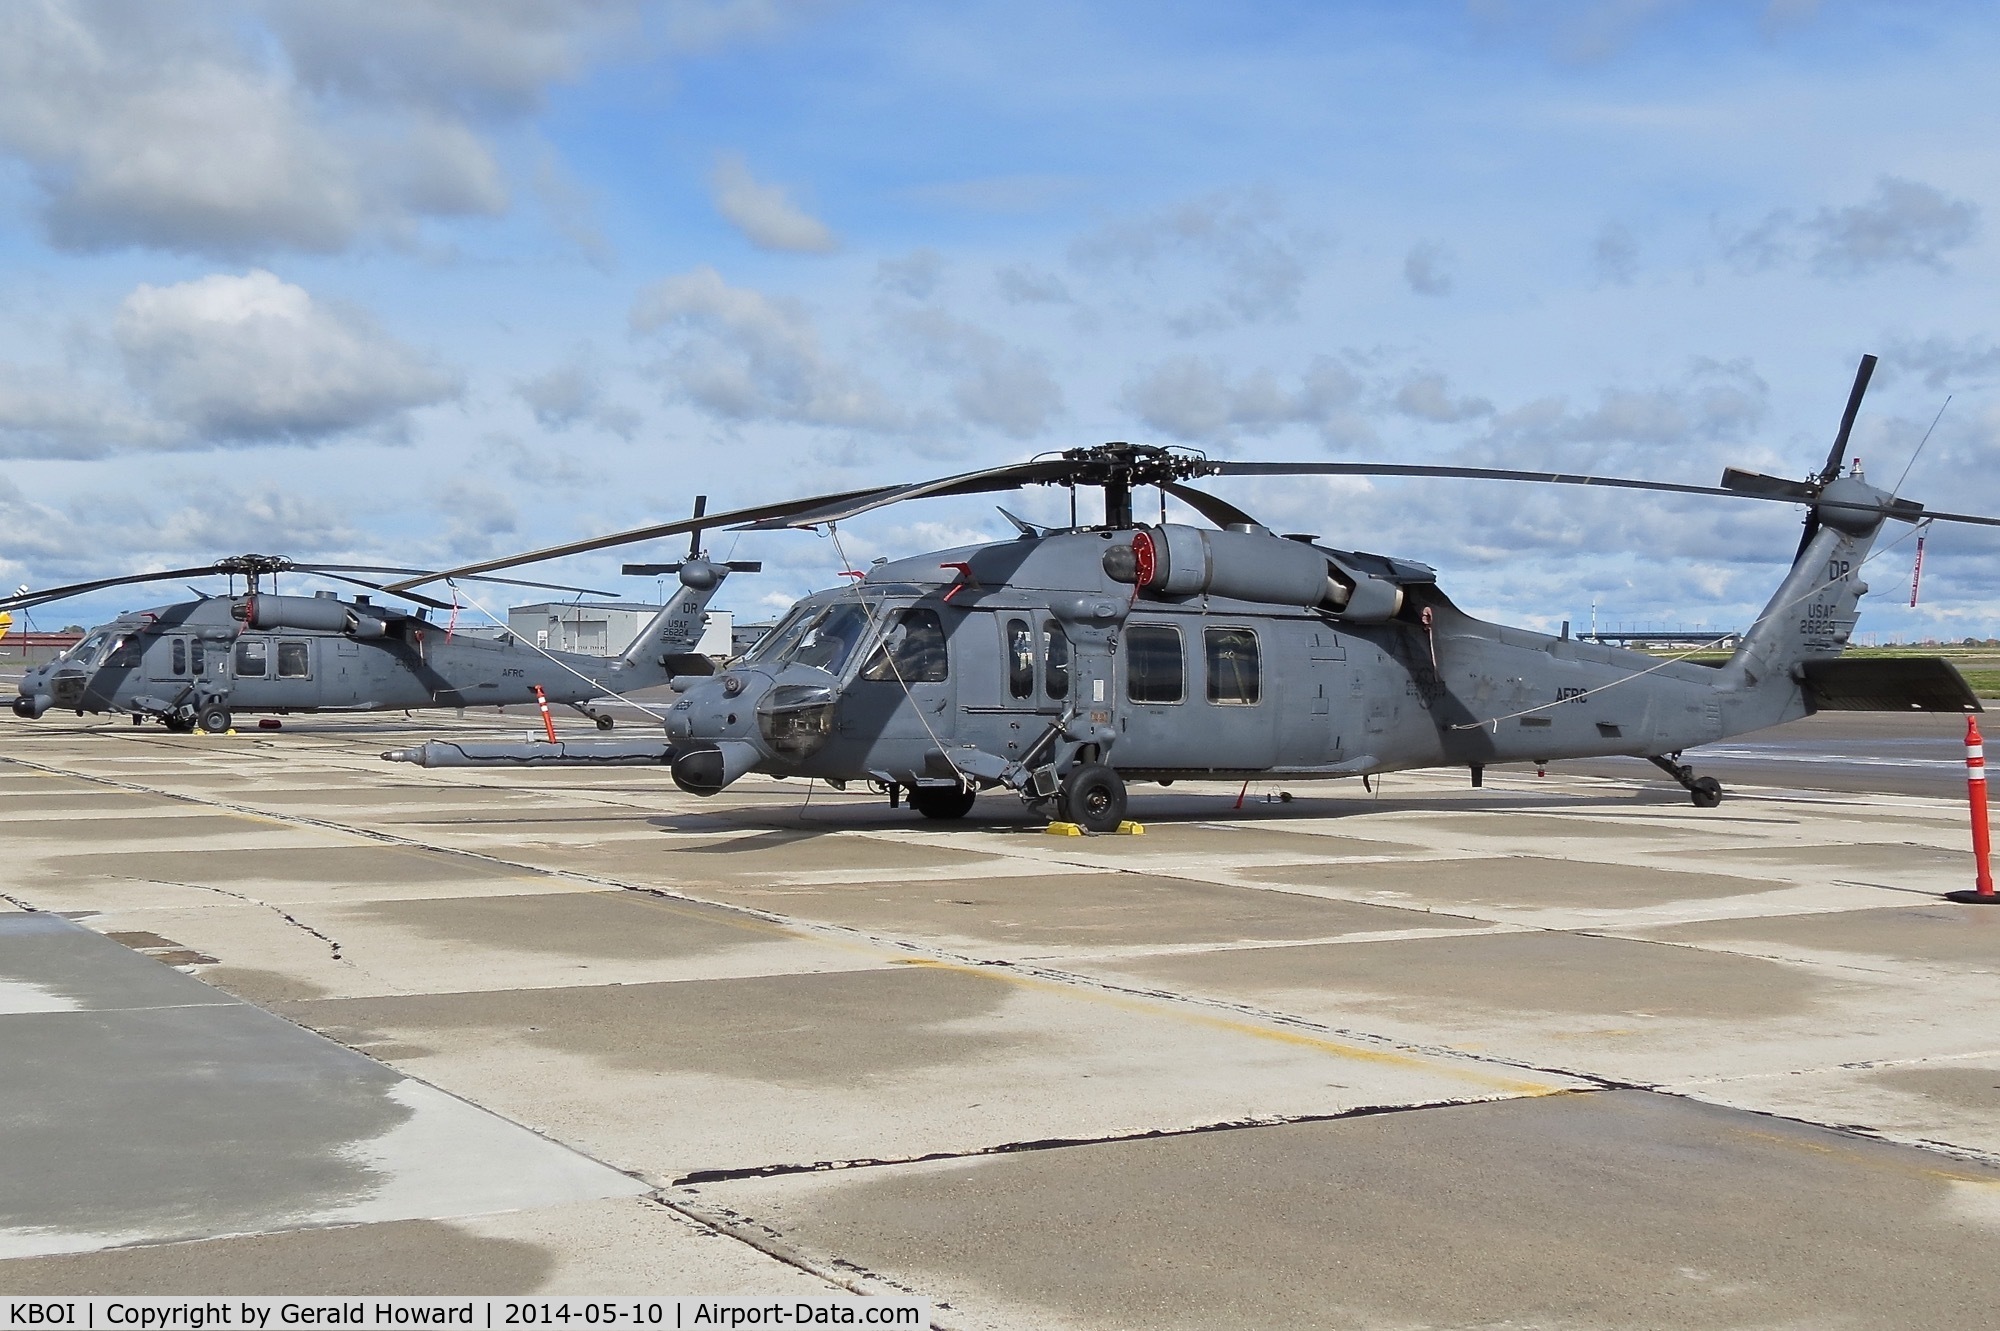 Boise Air Terminal/gowen Fld Airport (BOI) - Two HH-60G Pave hawks from the 305th RS, Davis-Monthan AFB, AZ.(AFRC)
Parked on the south GA ramp.